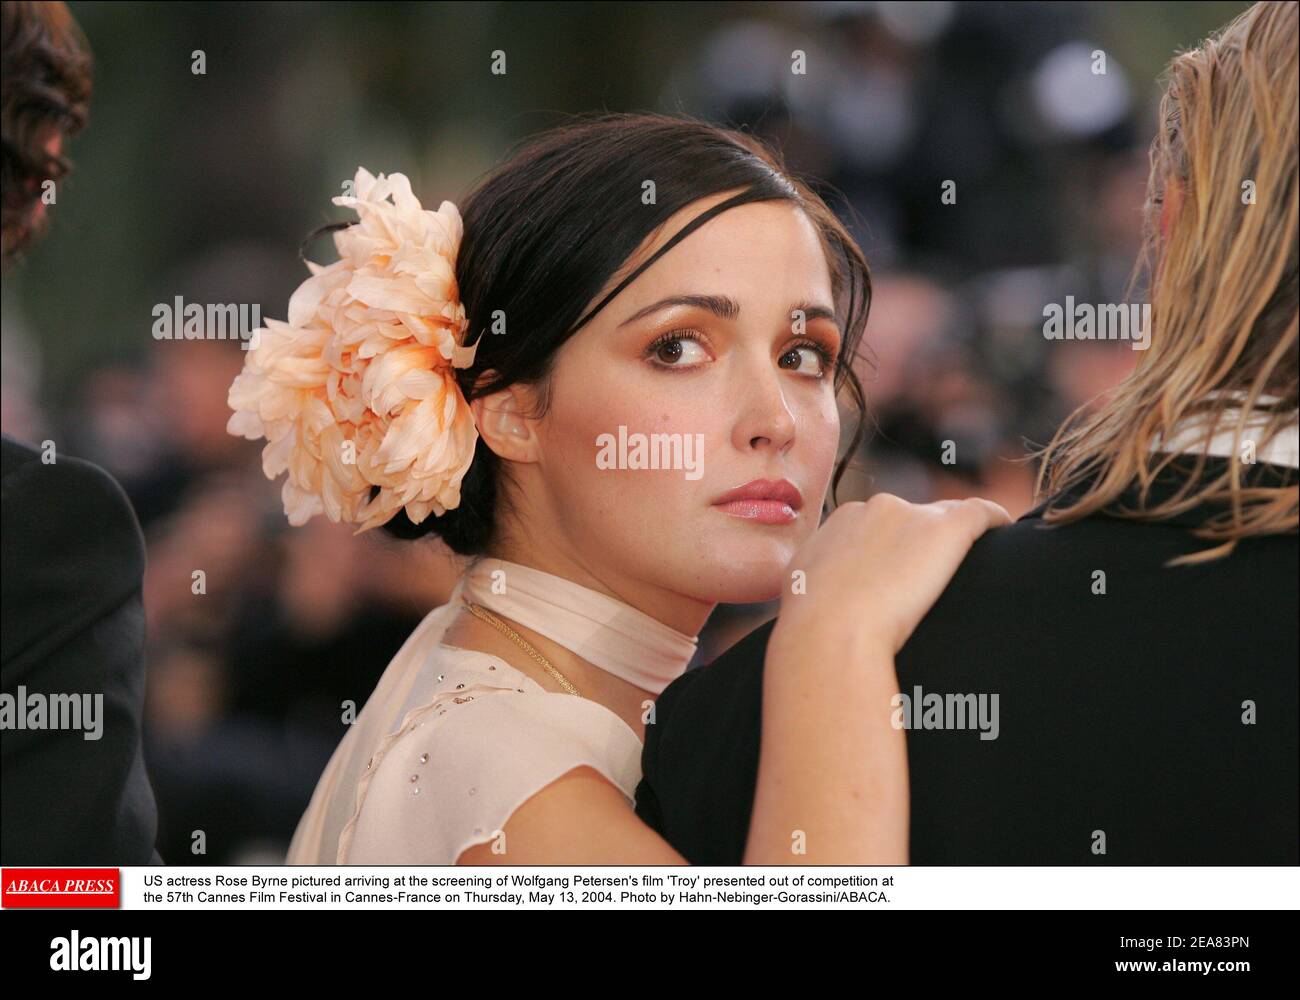 US actress Rose Byrne pictured arriving at the screening of Wolfgang Petersen's film 'Troy' presented out of competition at the 57th Cannes Film Festival in Cannes-France on Thursday, May 13, 2004. Photo by Hahn-Nebinger-Gorassini/ABACA. Stock Photo